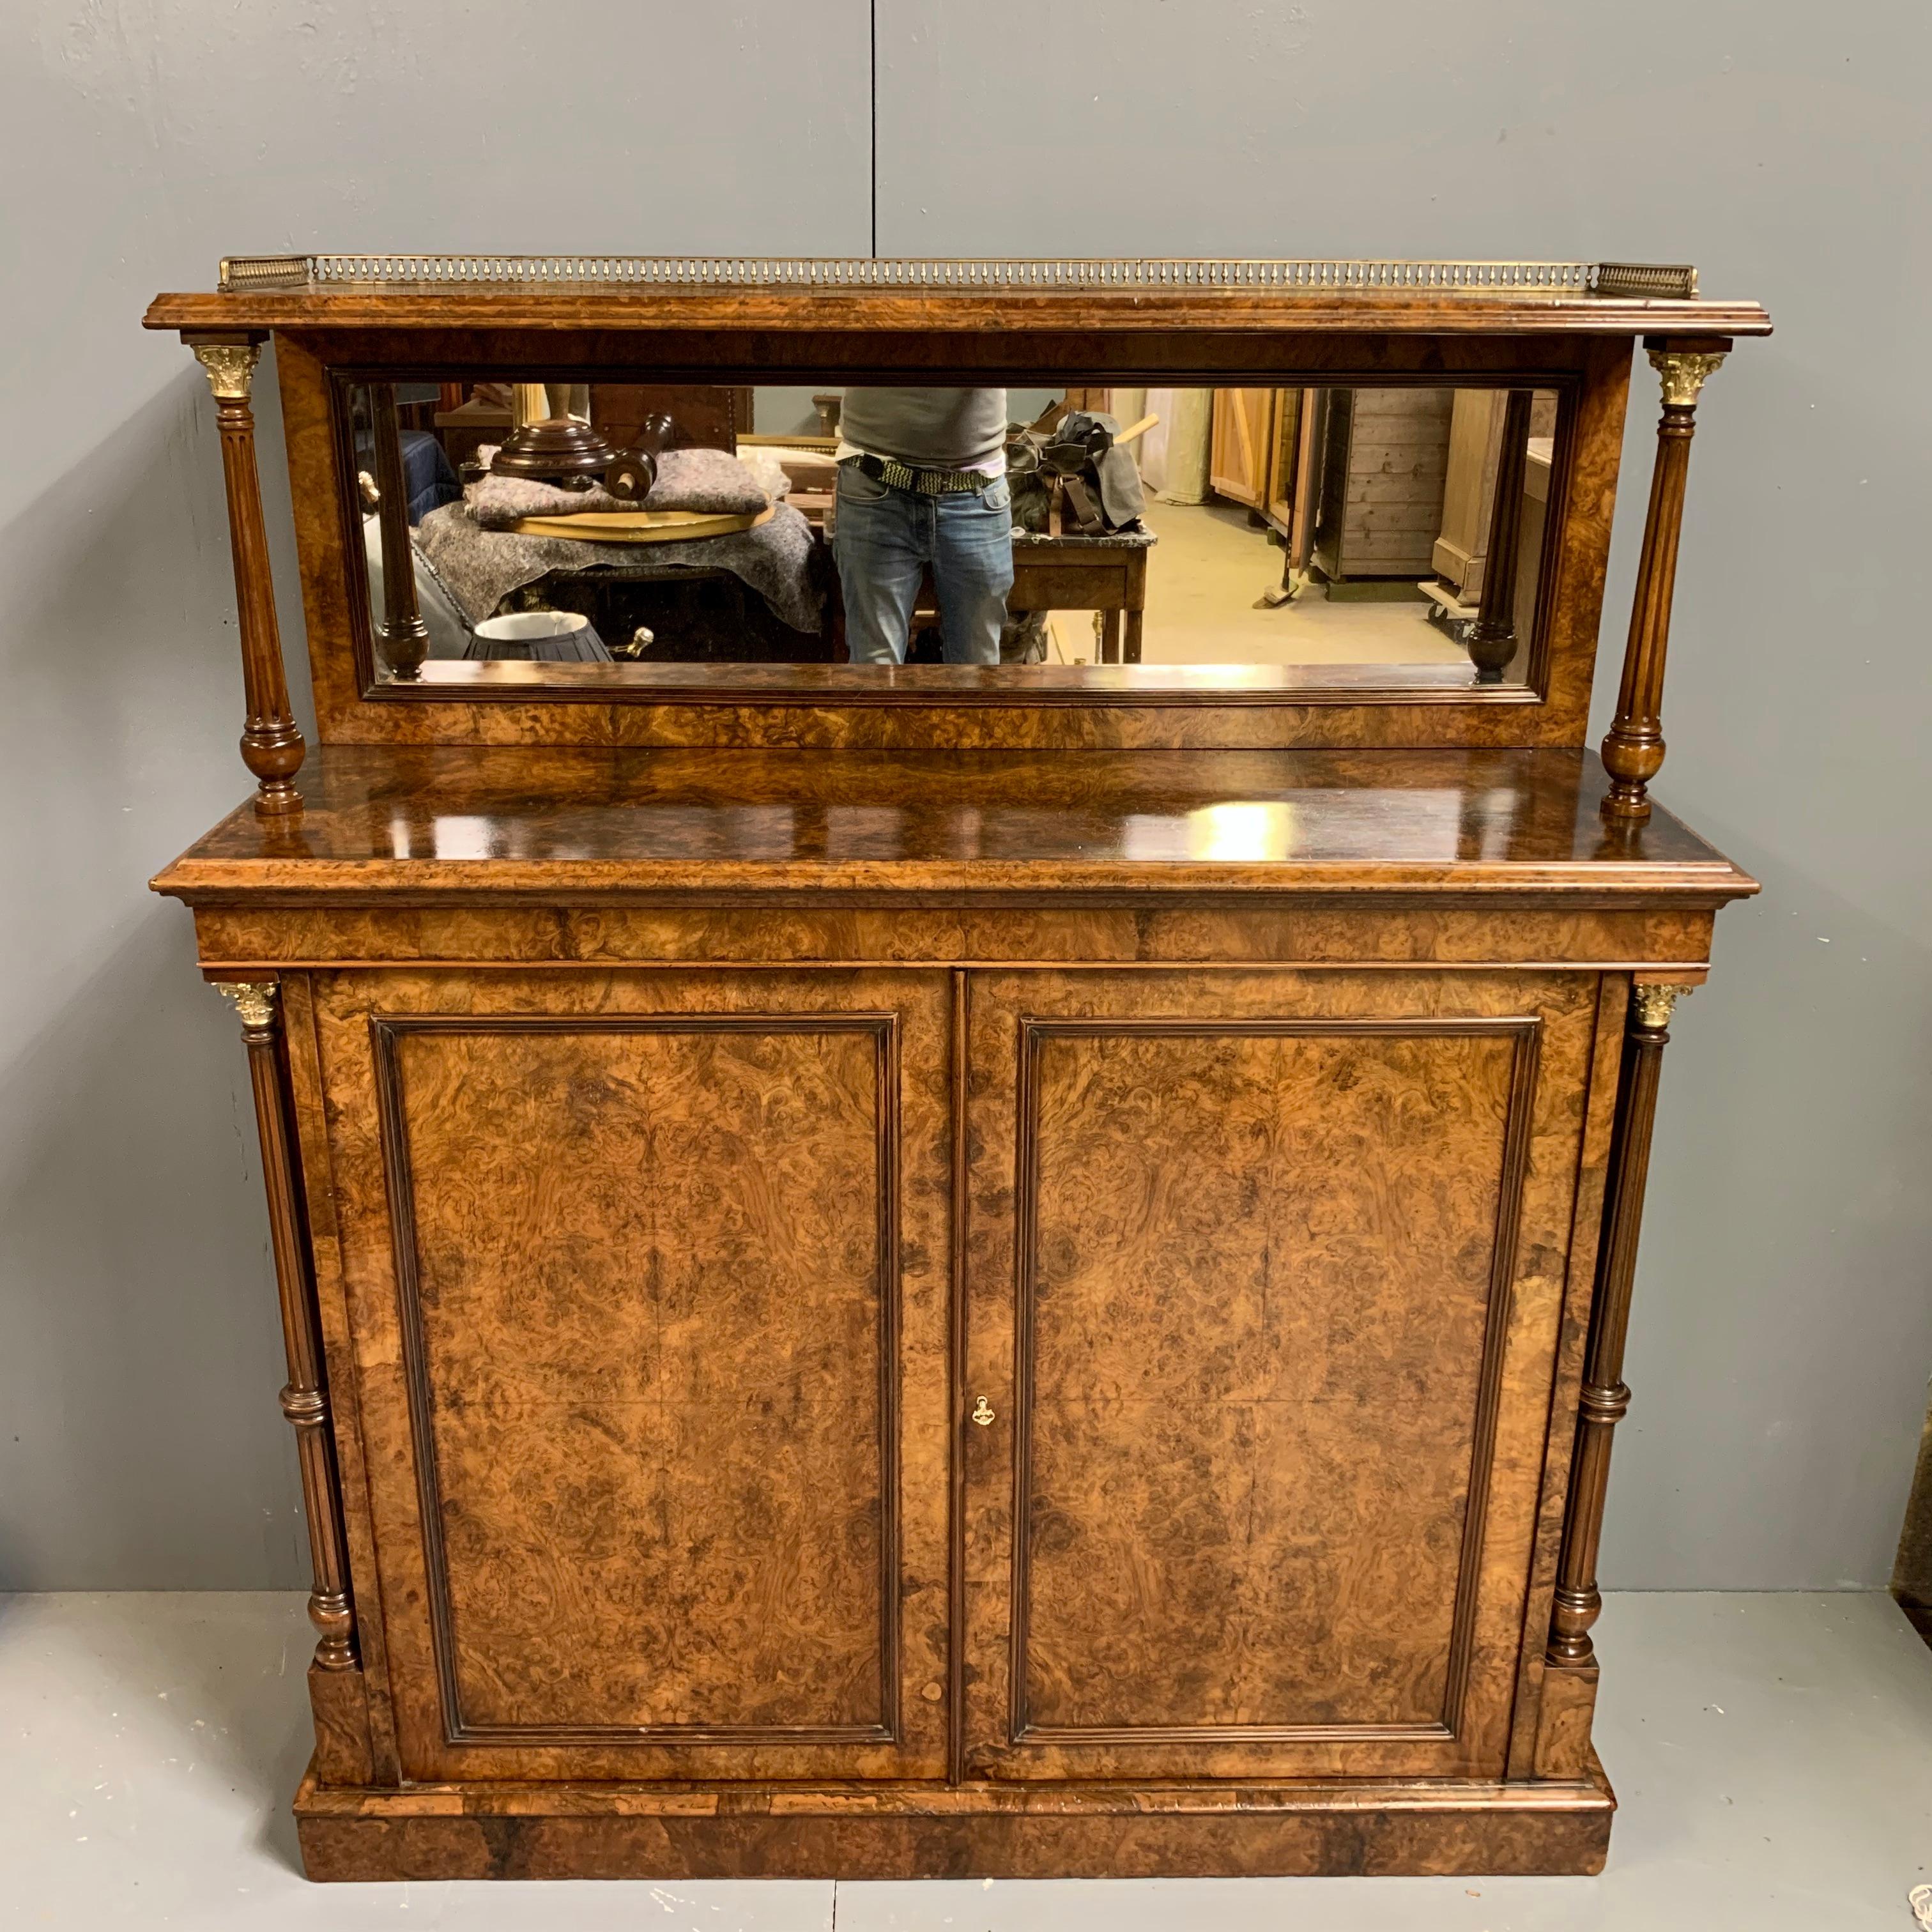 This is an extremely fine quality English 19th century burr walnut two door cabinet with its original mirror back and also a 3/4 gallery to the top rail.
Beautifully restored and the burr walnut colour tone is now as it was intended after years of